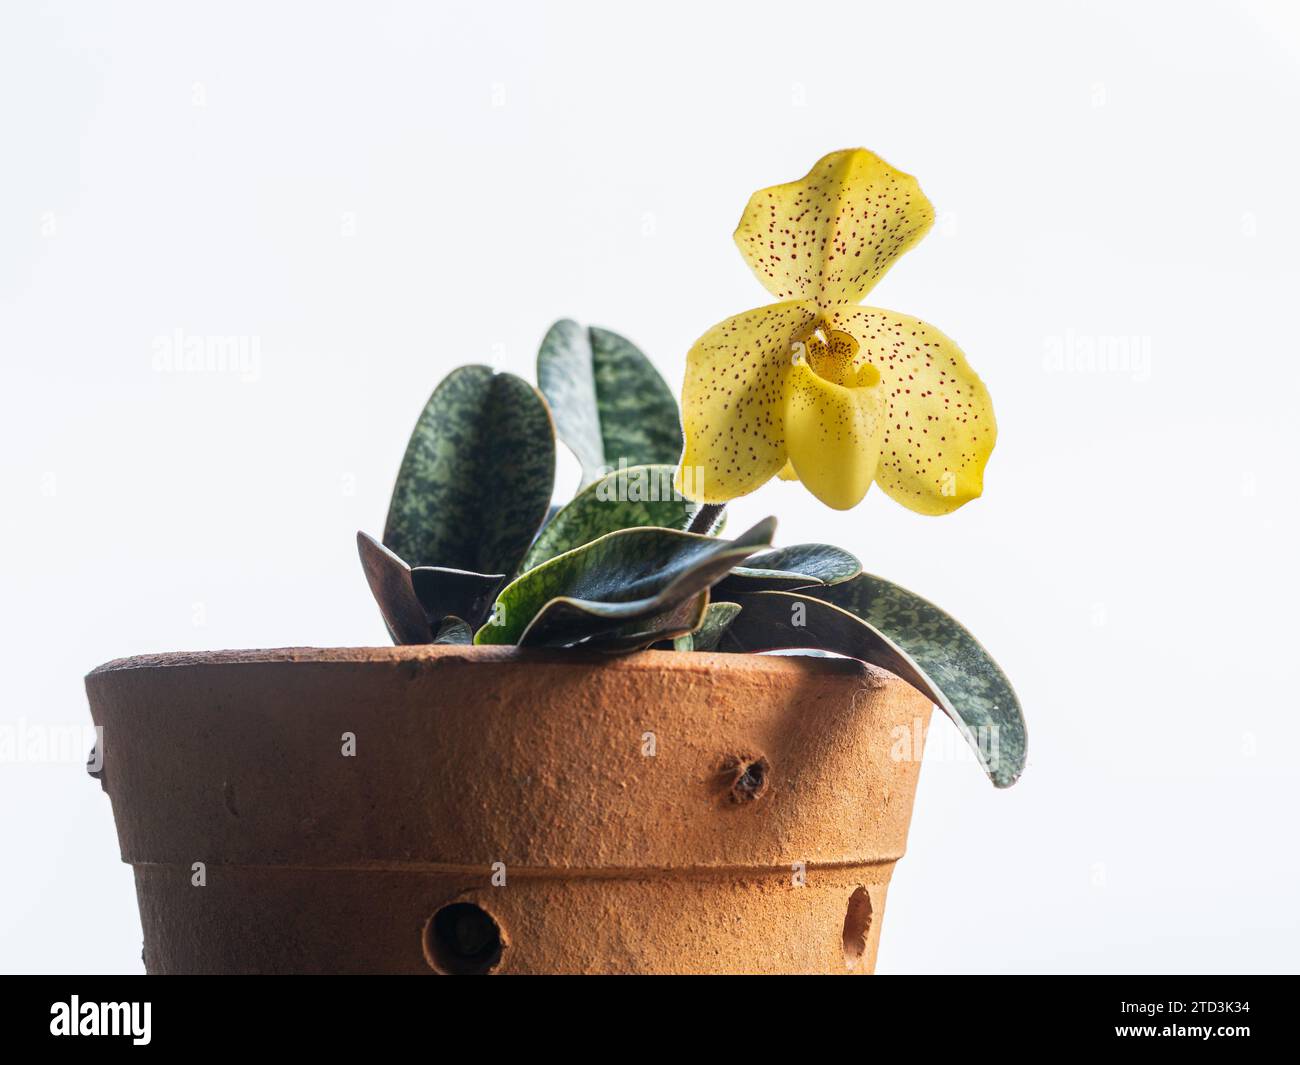 Closeup view of lady slipper orchid paphiopedilum wenshanense aka conco-bellatulum in pot with yellow and red dots flower isolated on white background Stock Photo